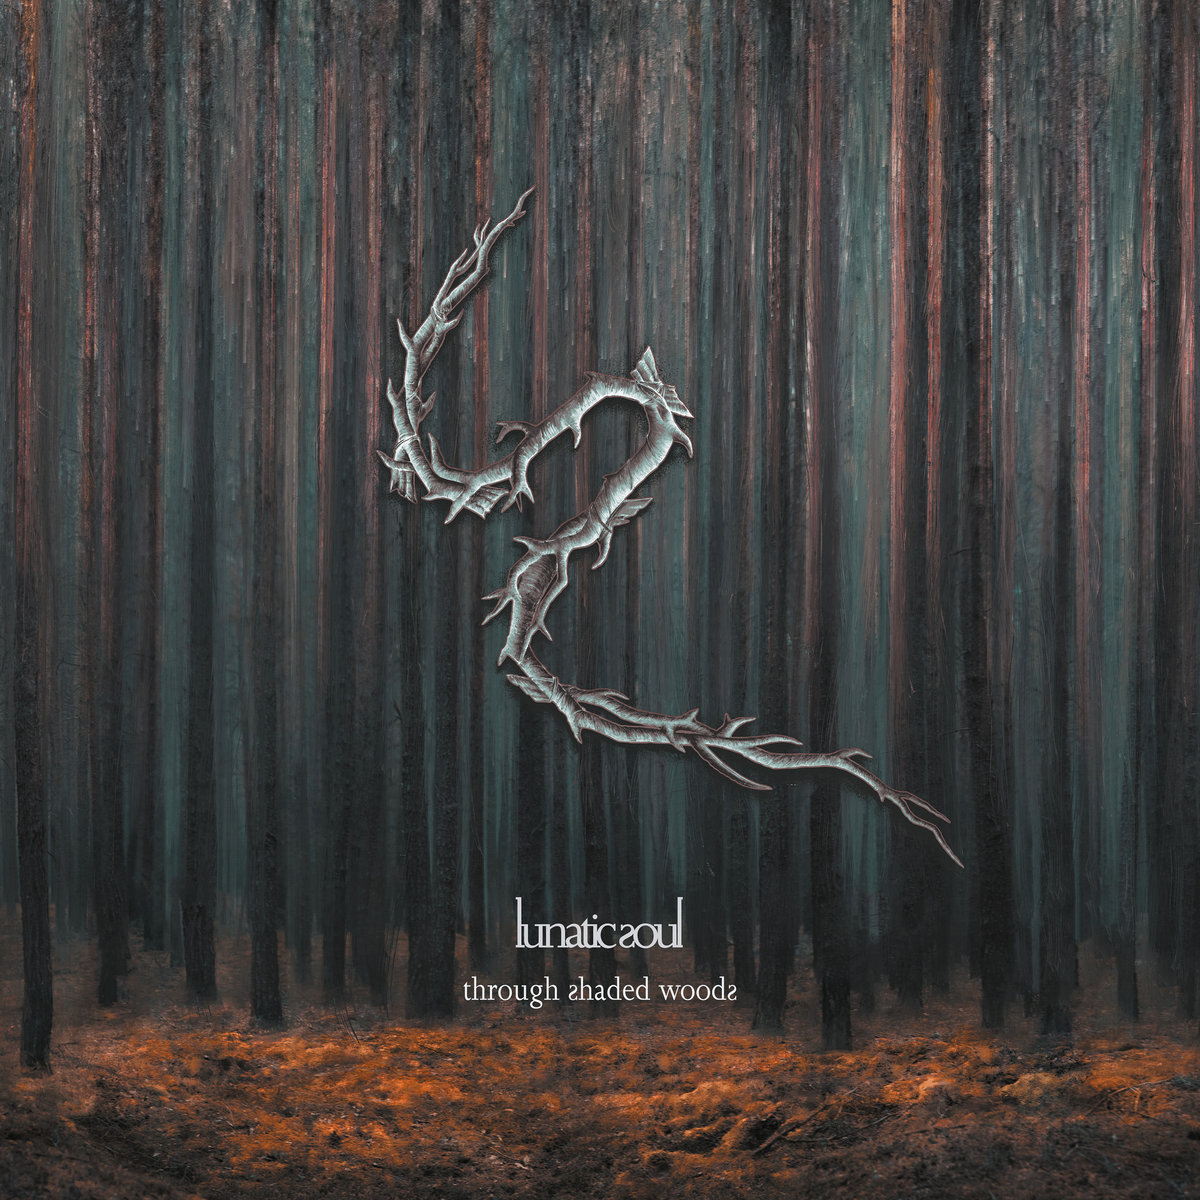 Lunatic Soul - Through Shaded Woods (Deluxe Edition) (2020) [FLAC 24bit/44,1kHz]